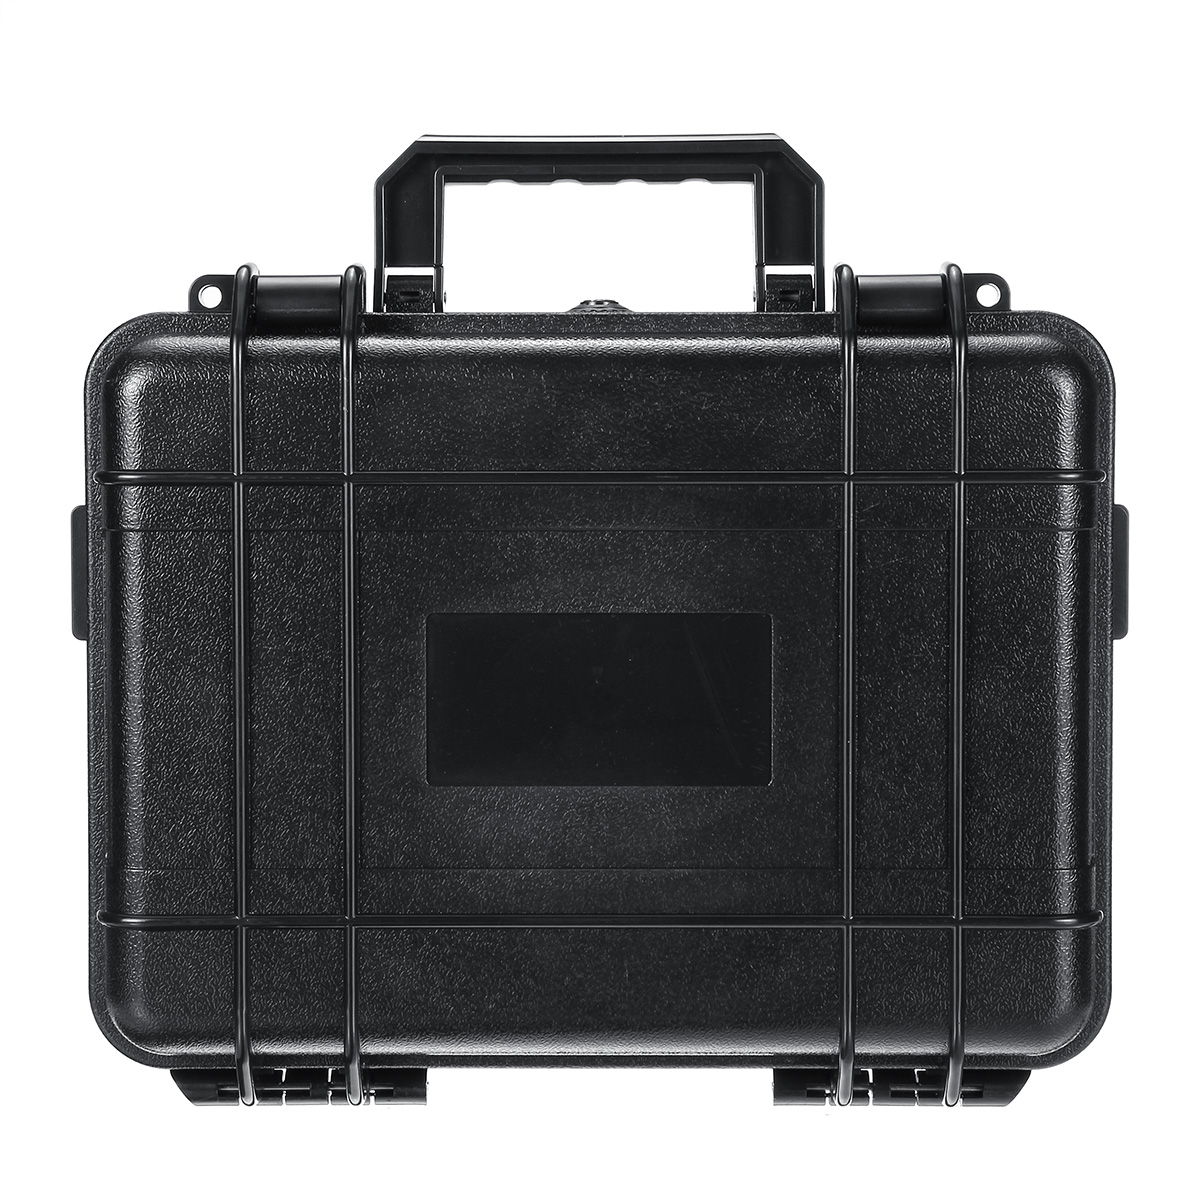 Outdoor-Portable-EDC-Instrument-Tool-Kits-Box-Waterproof-Shockproof-Protective-Safety-Storage-Case-1553948-3